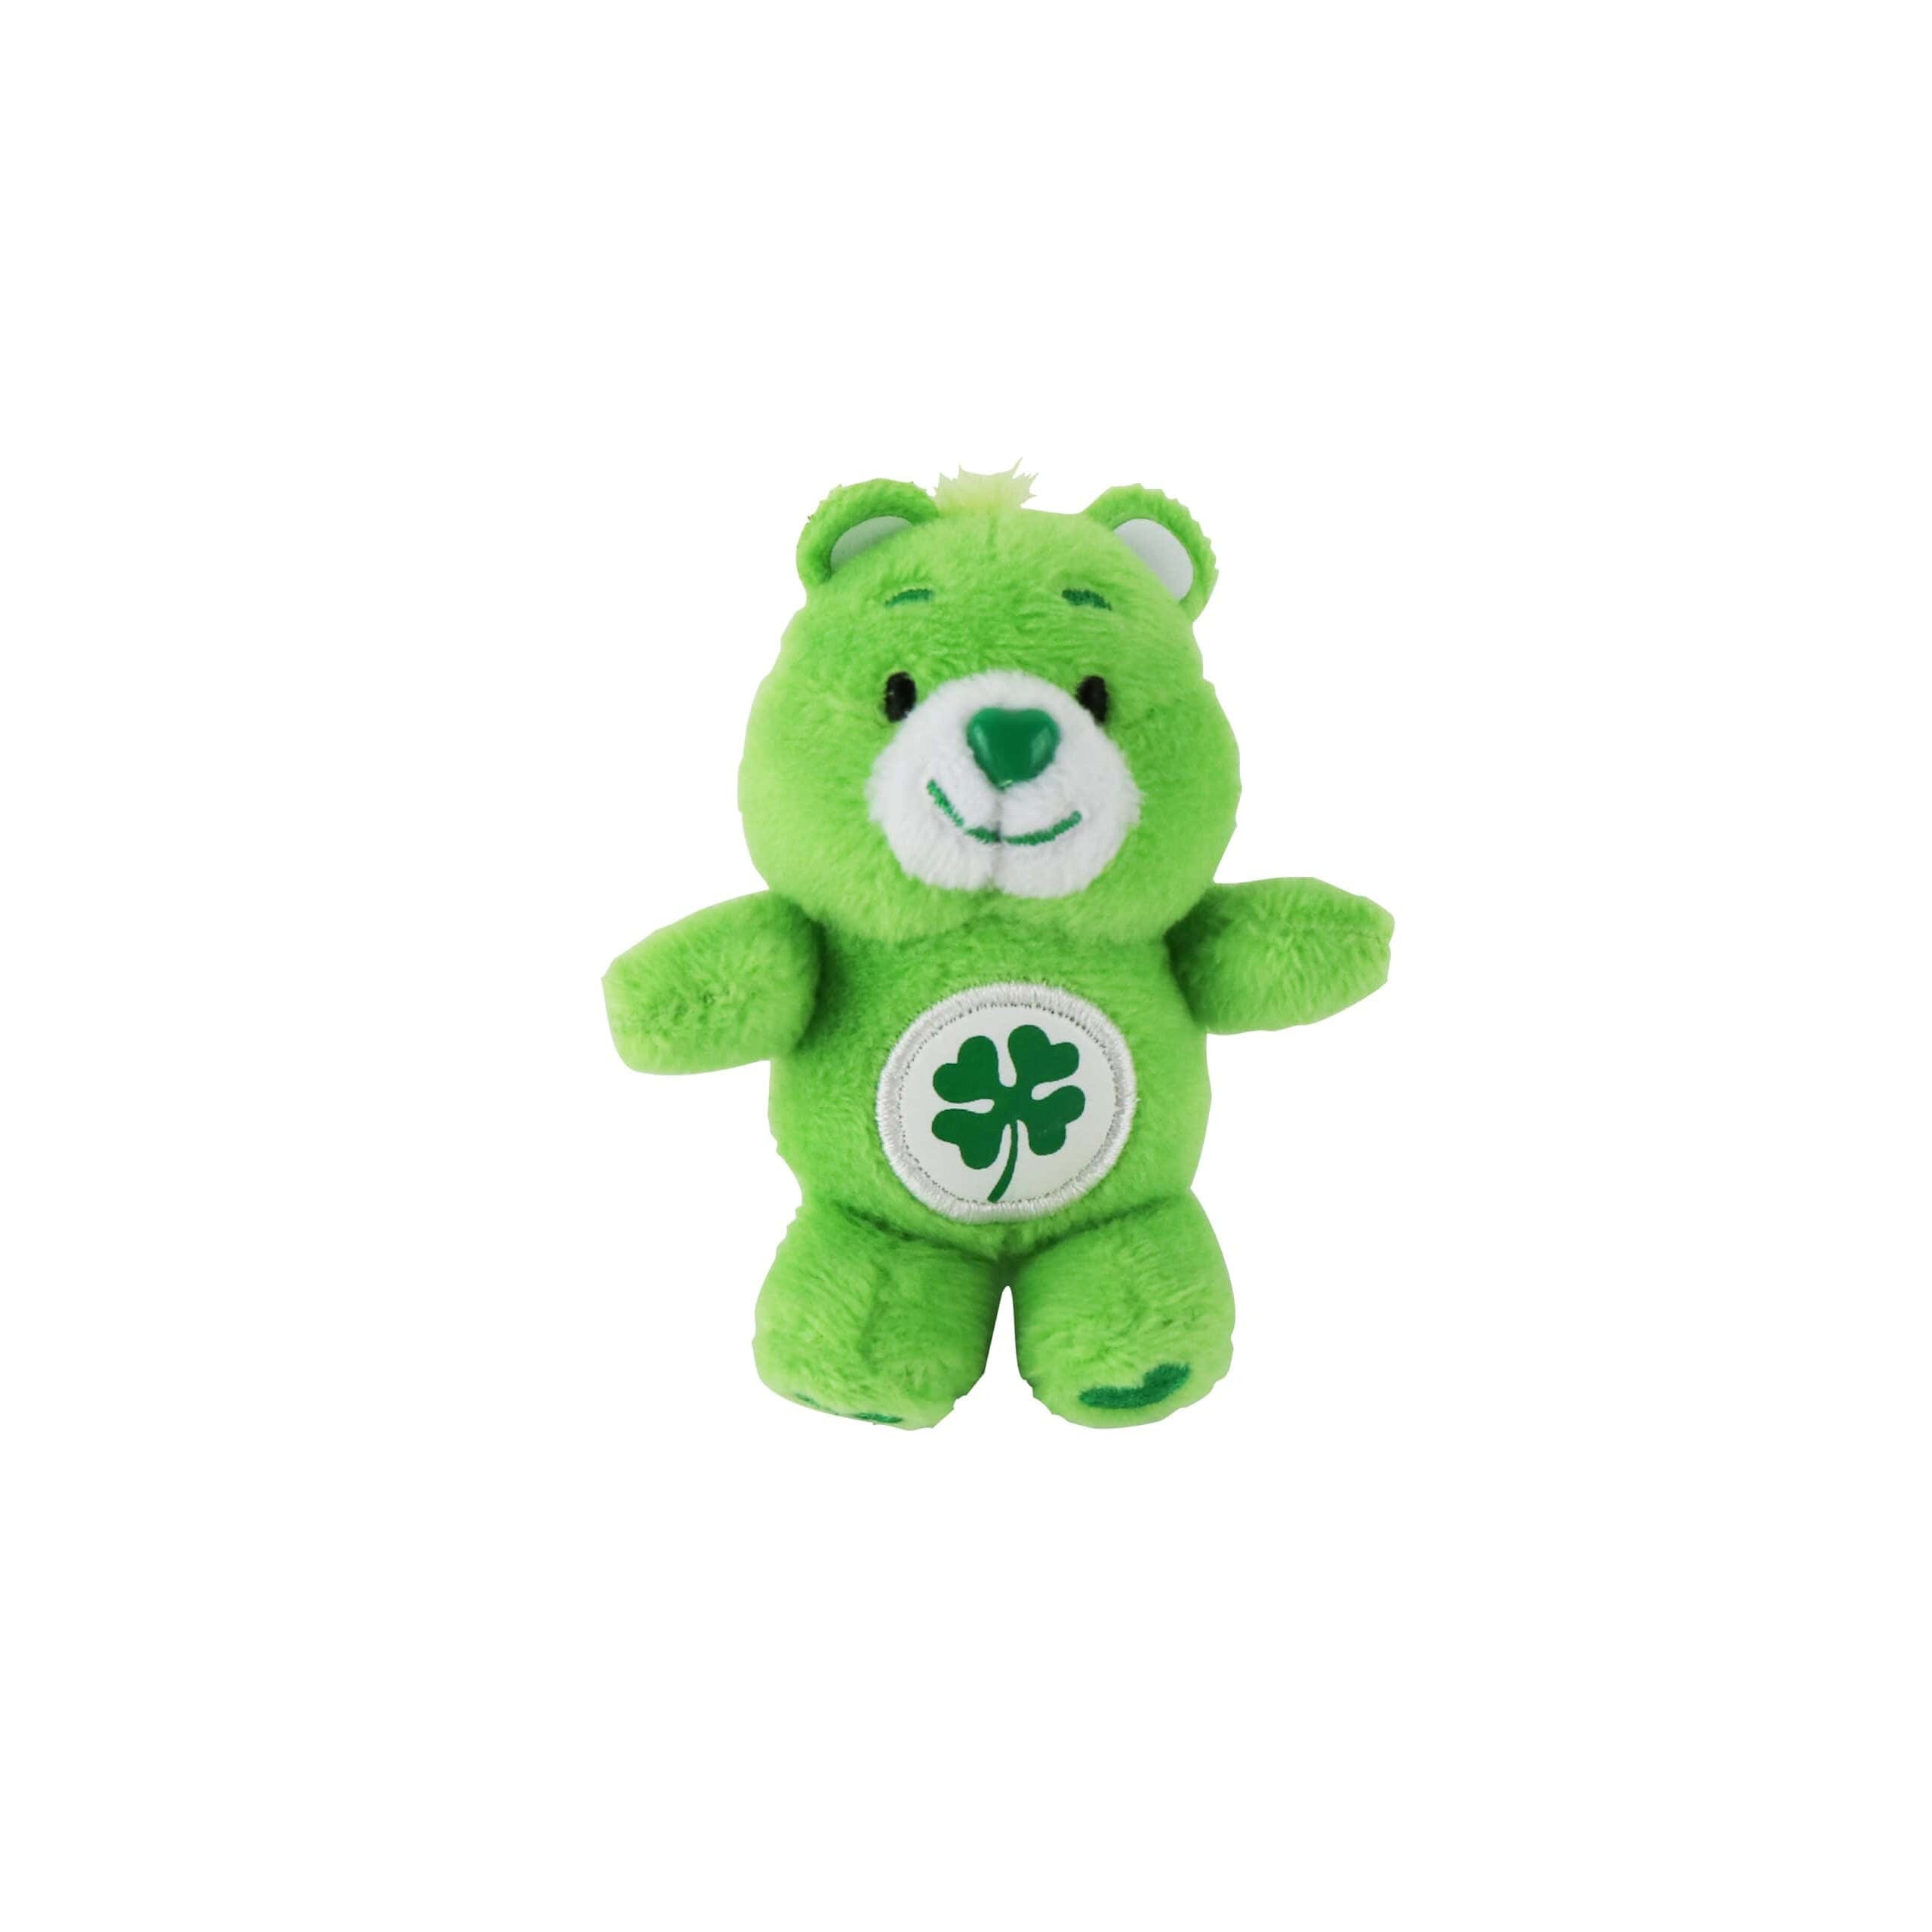 Super Impulse-World's Smallest Care Bears series 2 - Assorted Styles-5012-2-Legacy Toys